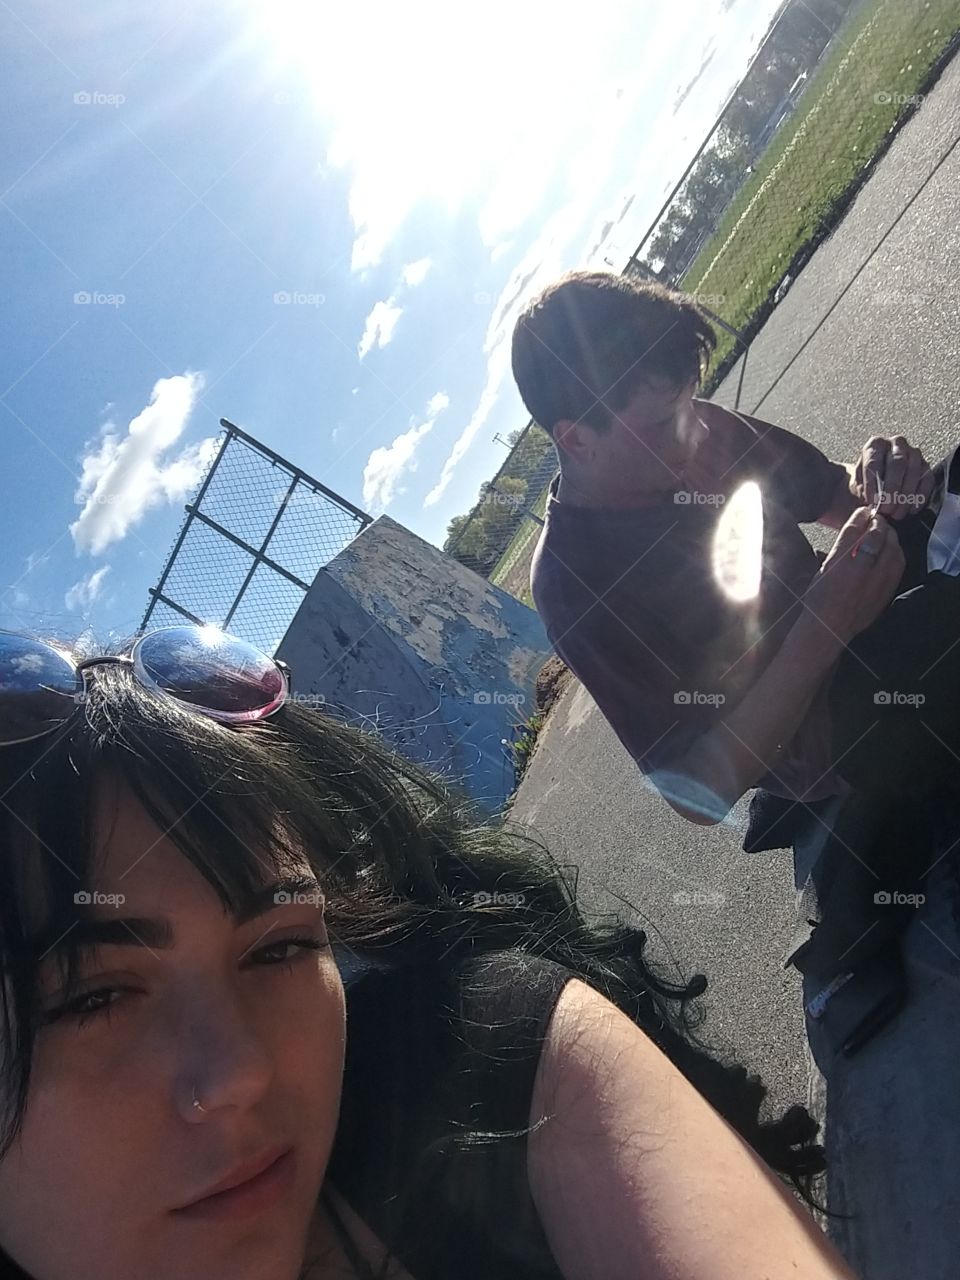 at the skatepark with my girl